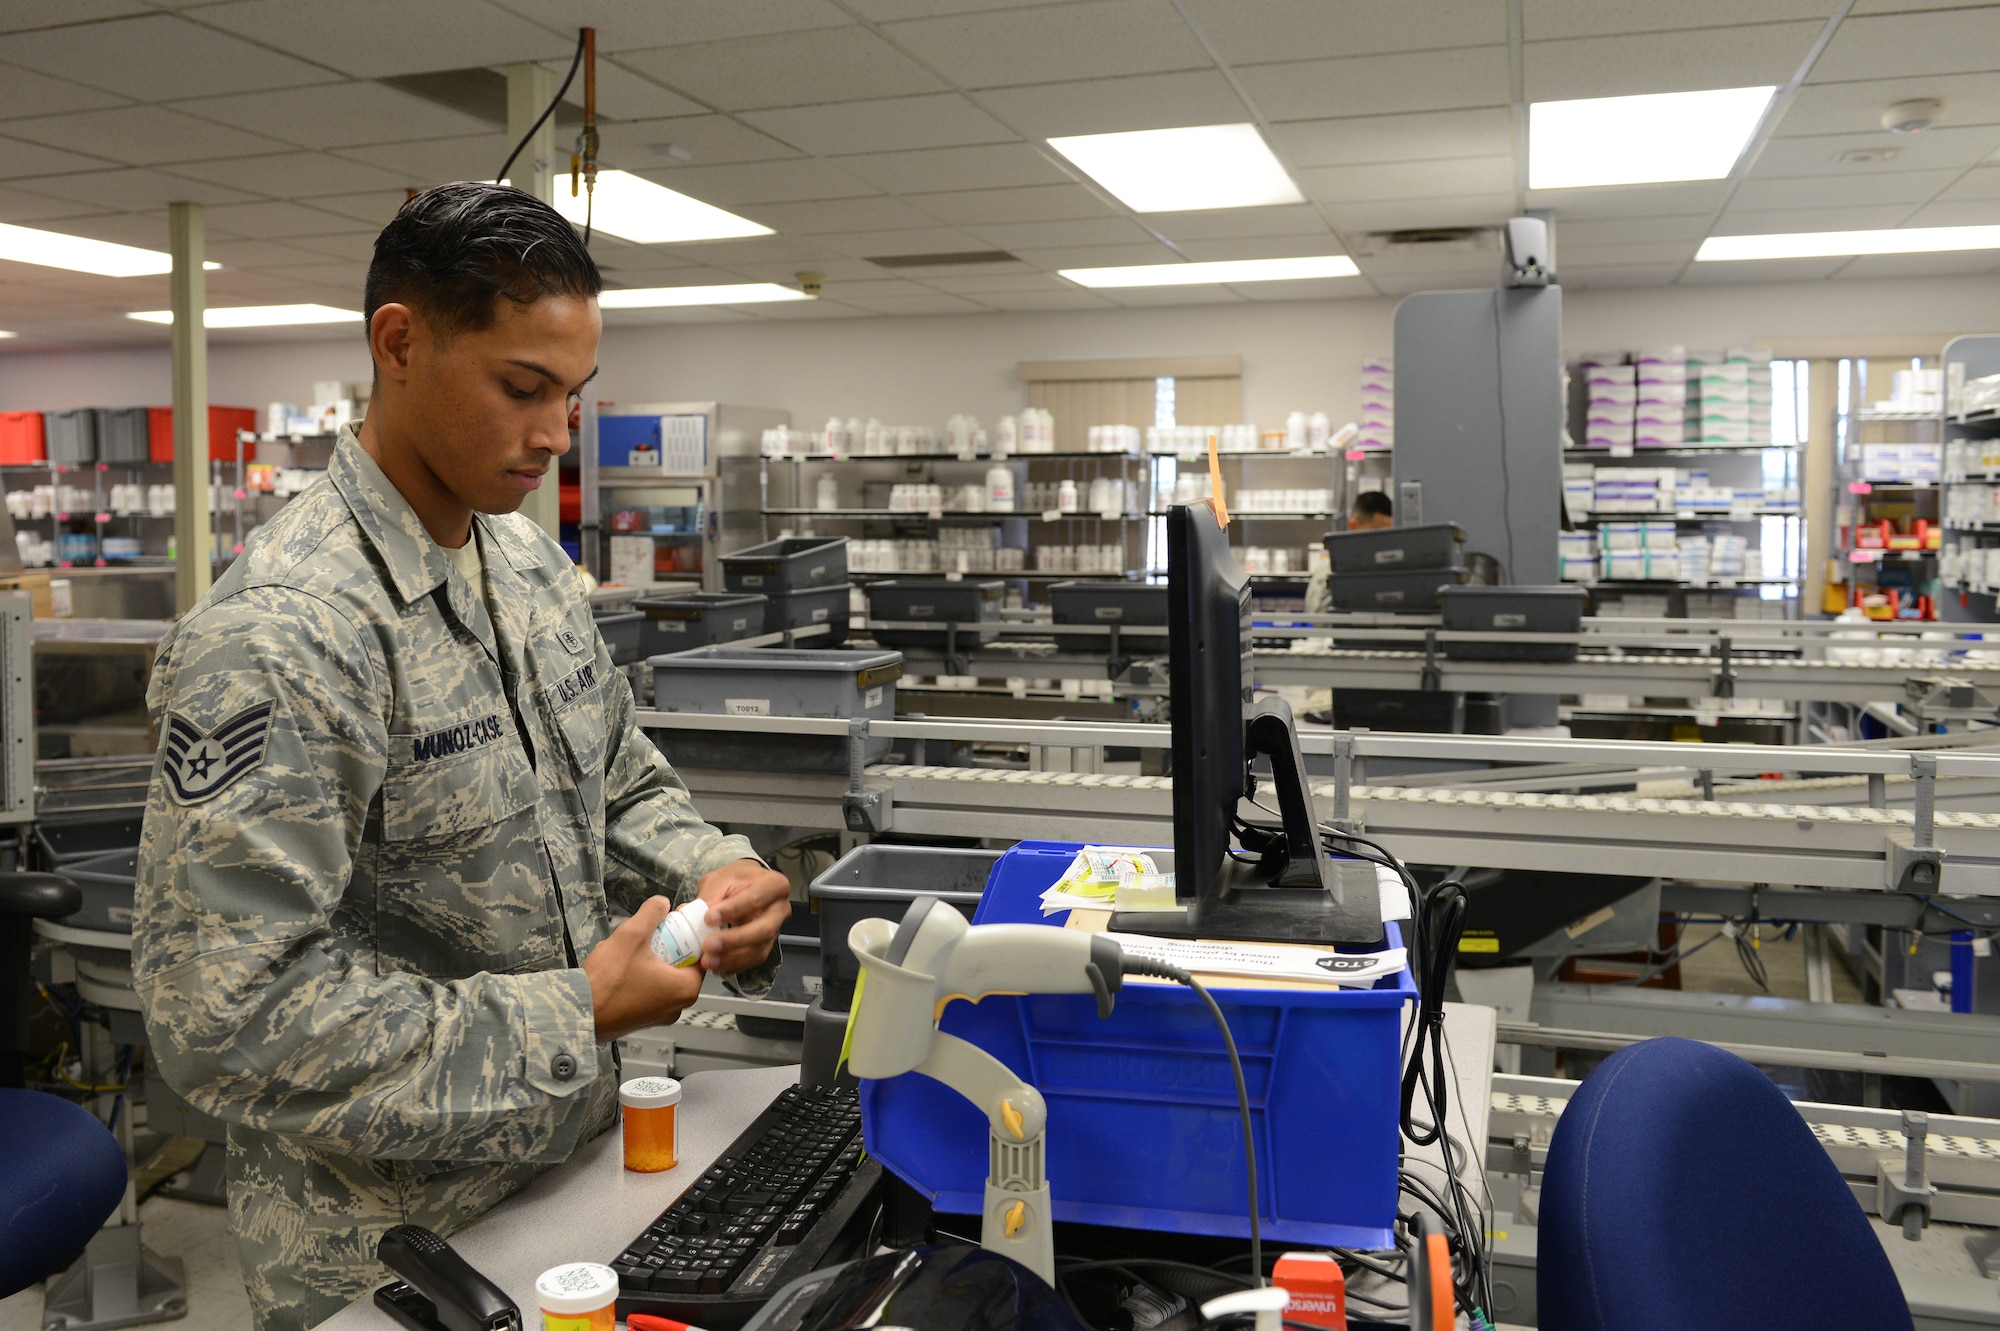 Staff Sgt. Aaron Munoz-Case, 56th Medical Support Squadron Arizona Refilling Center acting NCO in charge, checks prescriptions to ensure proper medication is packed at Luke Air Force Base, Arizona, Oct. 19, 2015. The ARC handles refilling prescriptions for all Tri Care Beneficiaries in the Phoenix and Scottsdale area. (U.S. Air Force photo by Senior Airman James Hensley)